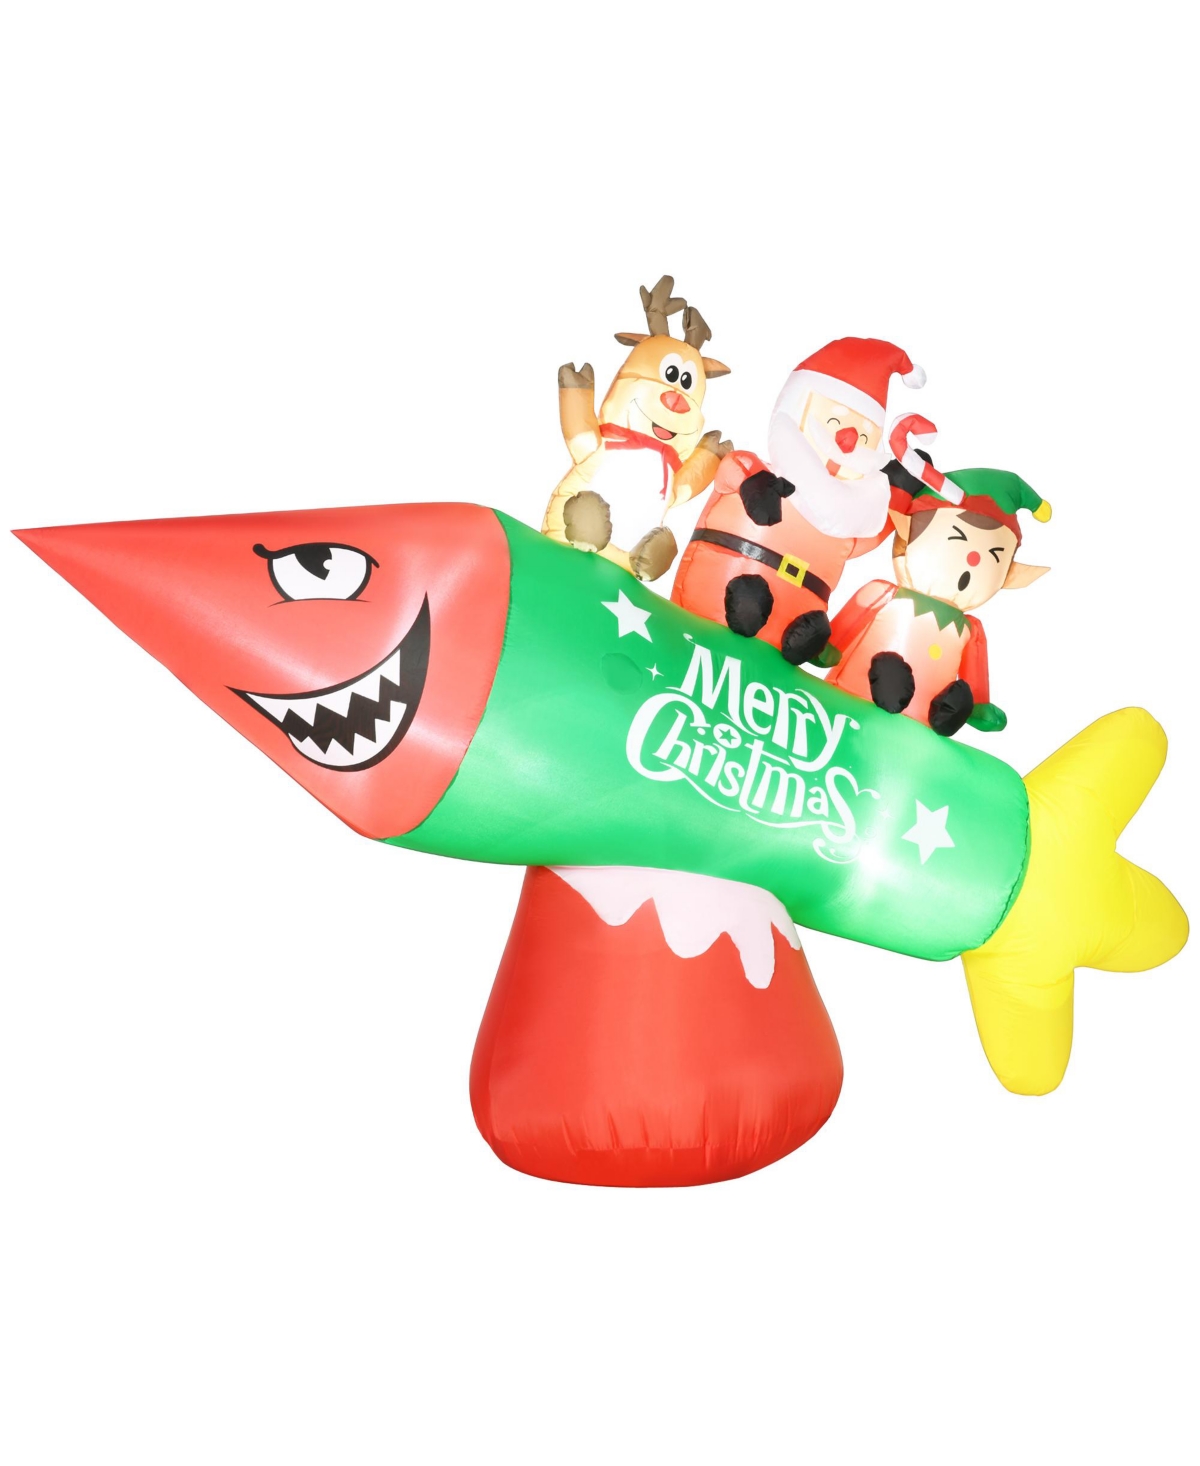 9' Inflatable Christmas Rocket with Santa Claus, Led Yard Display - Multi-colored